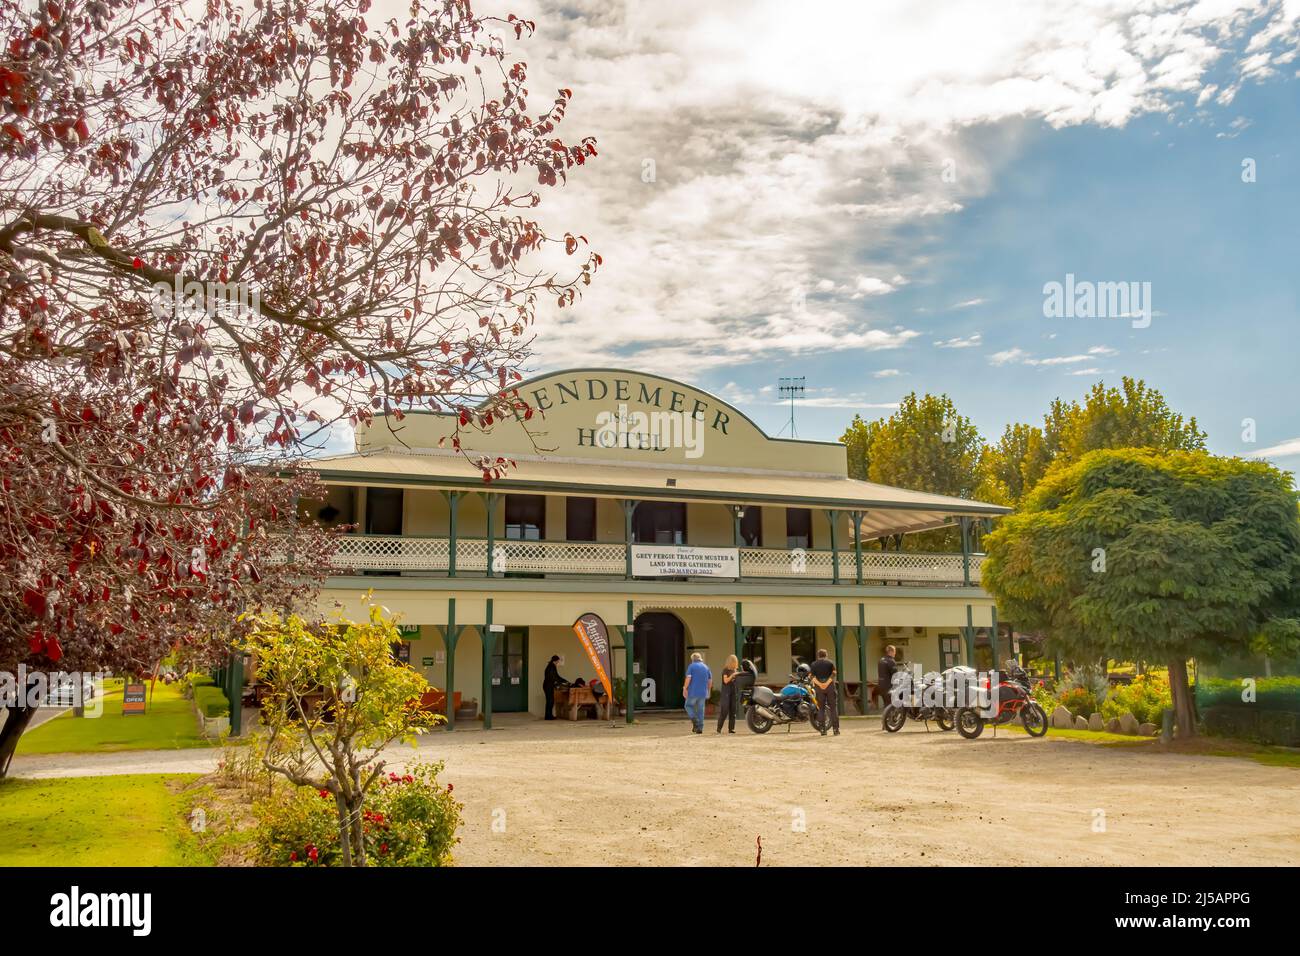 Australian Country Town Hotel, Bendemeer NSW. Stock Photo